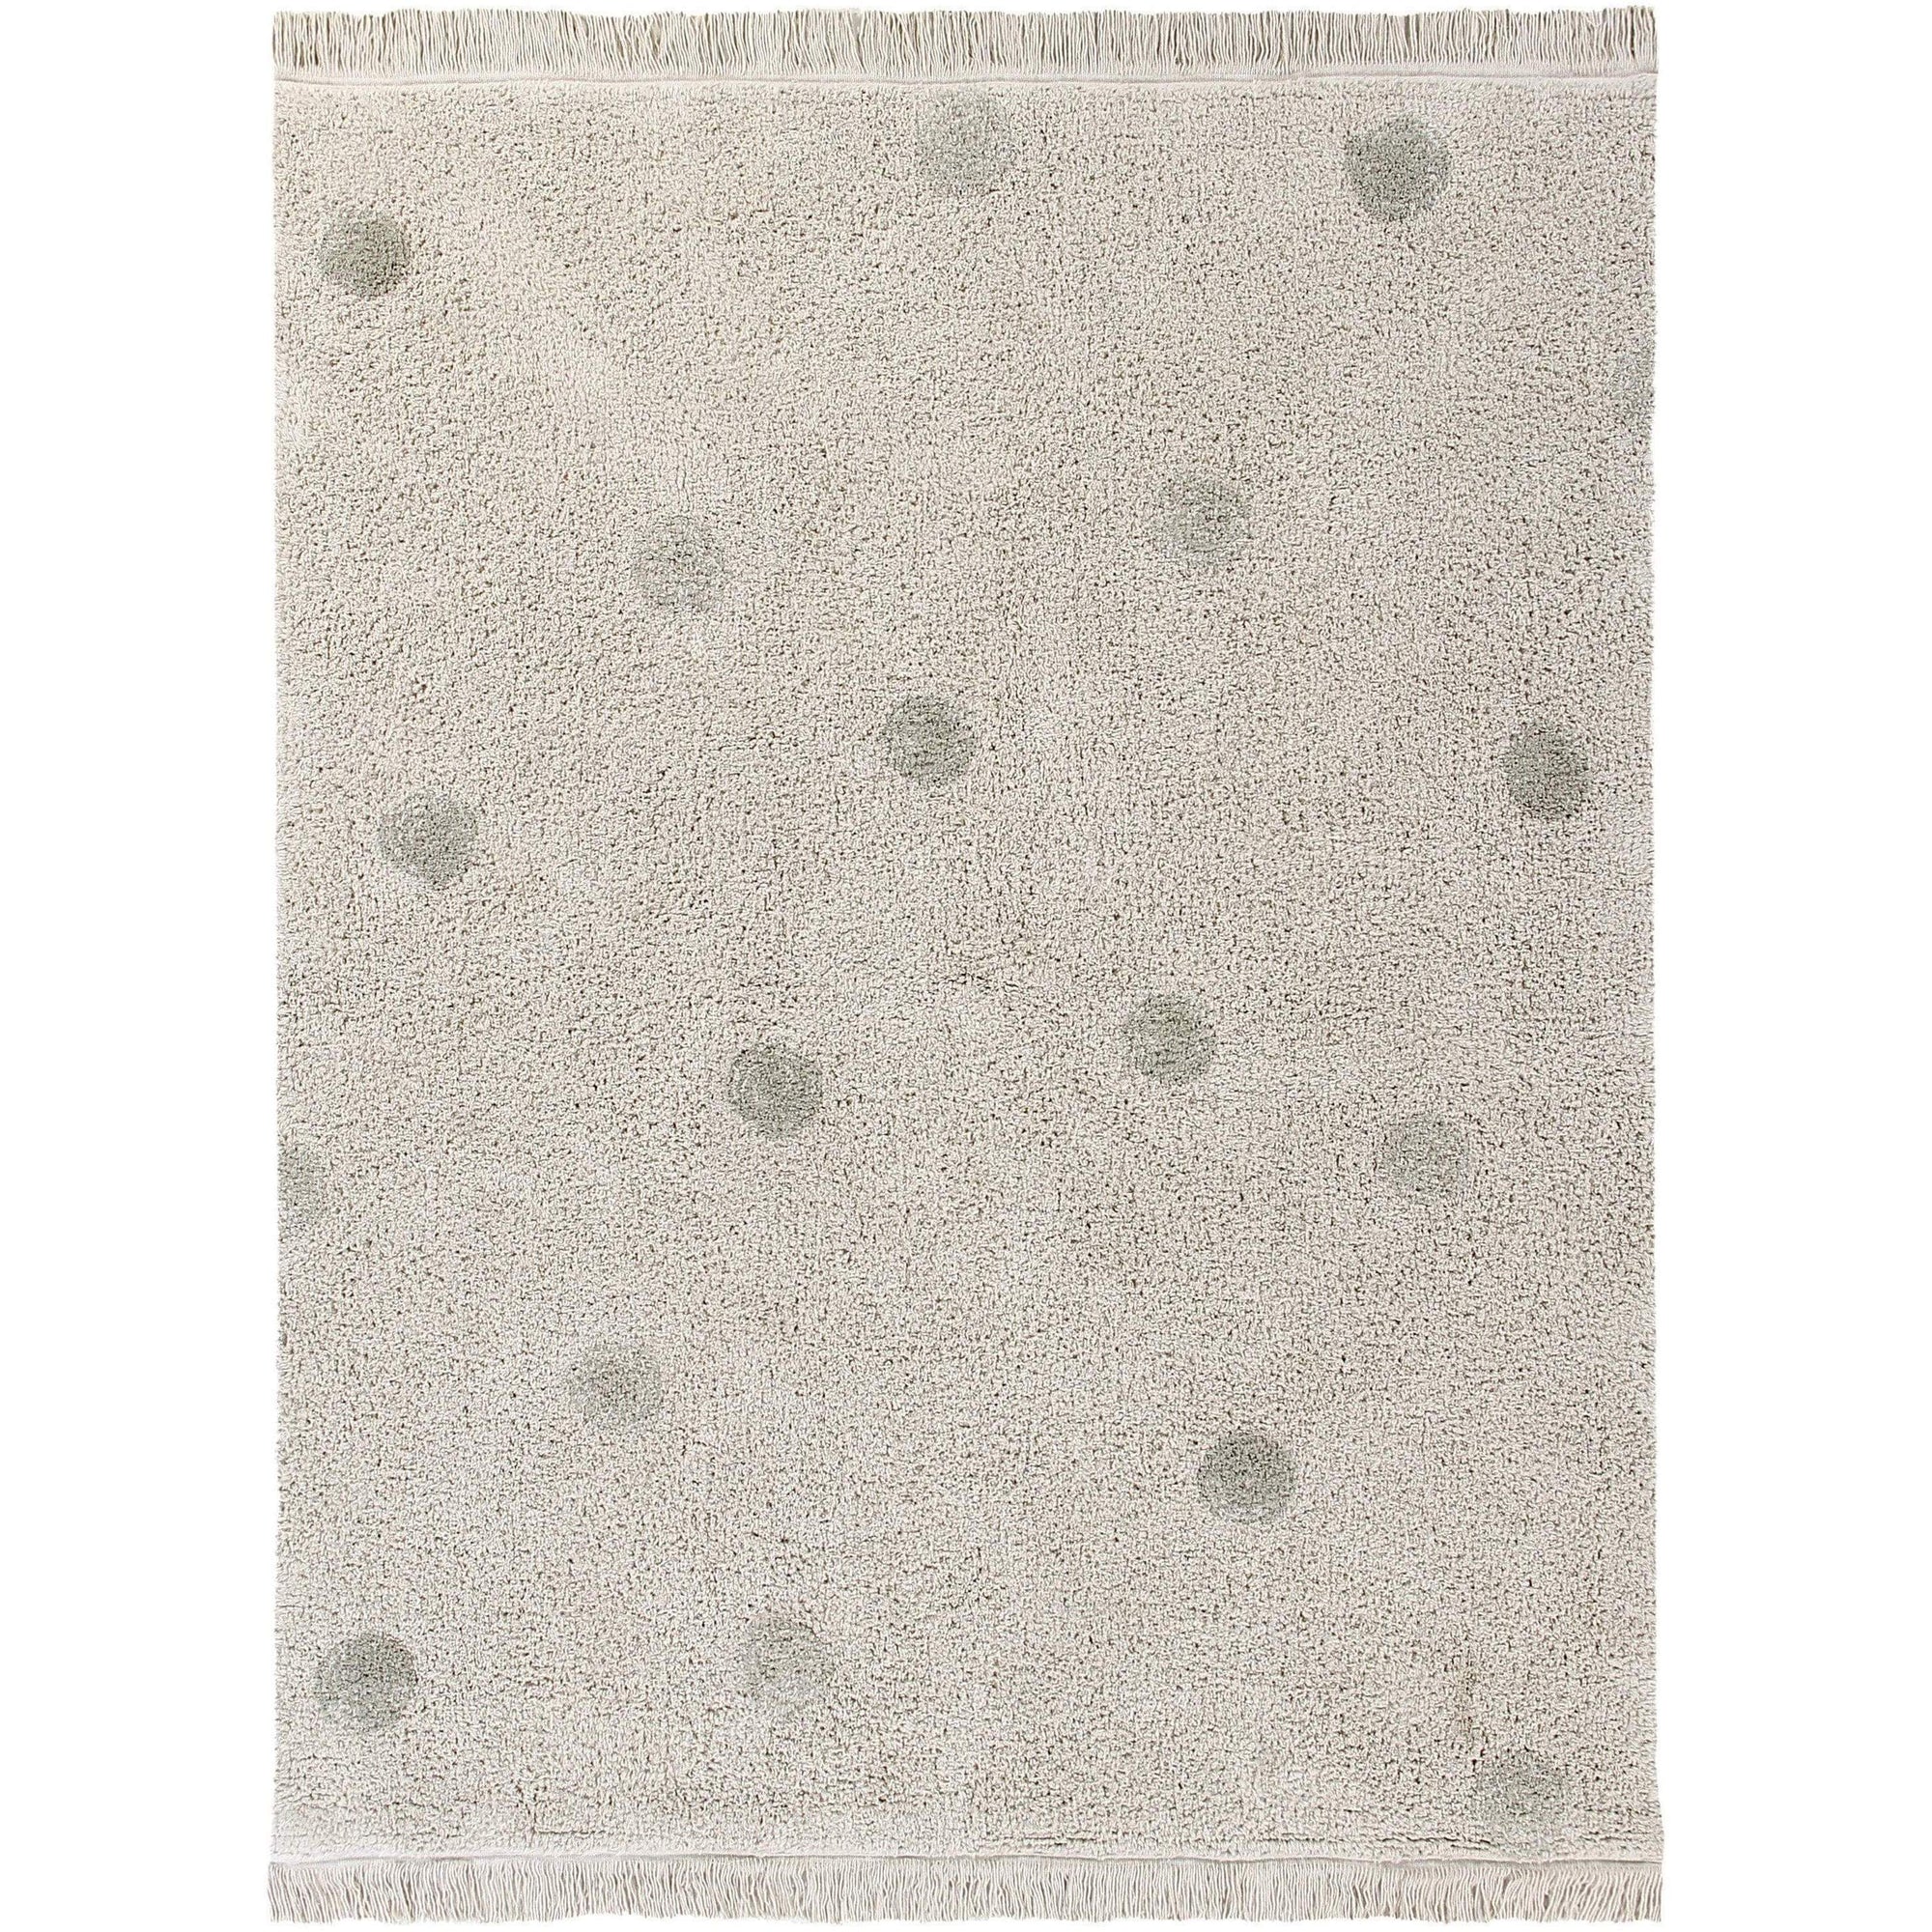 Lorena Canals Hippy Dots Natural Olive Washable Area Rug